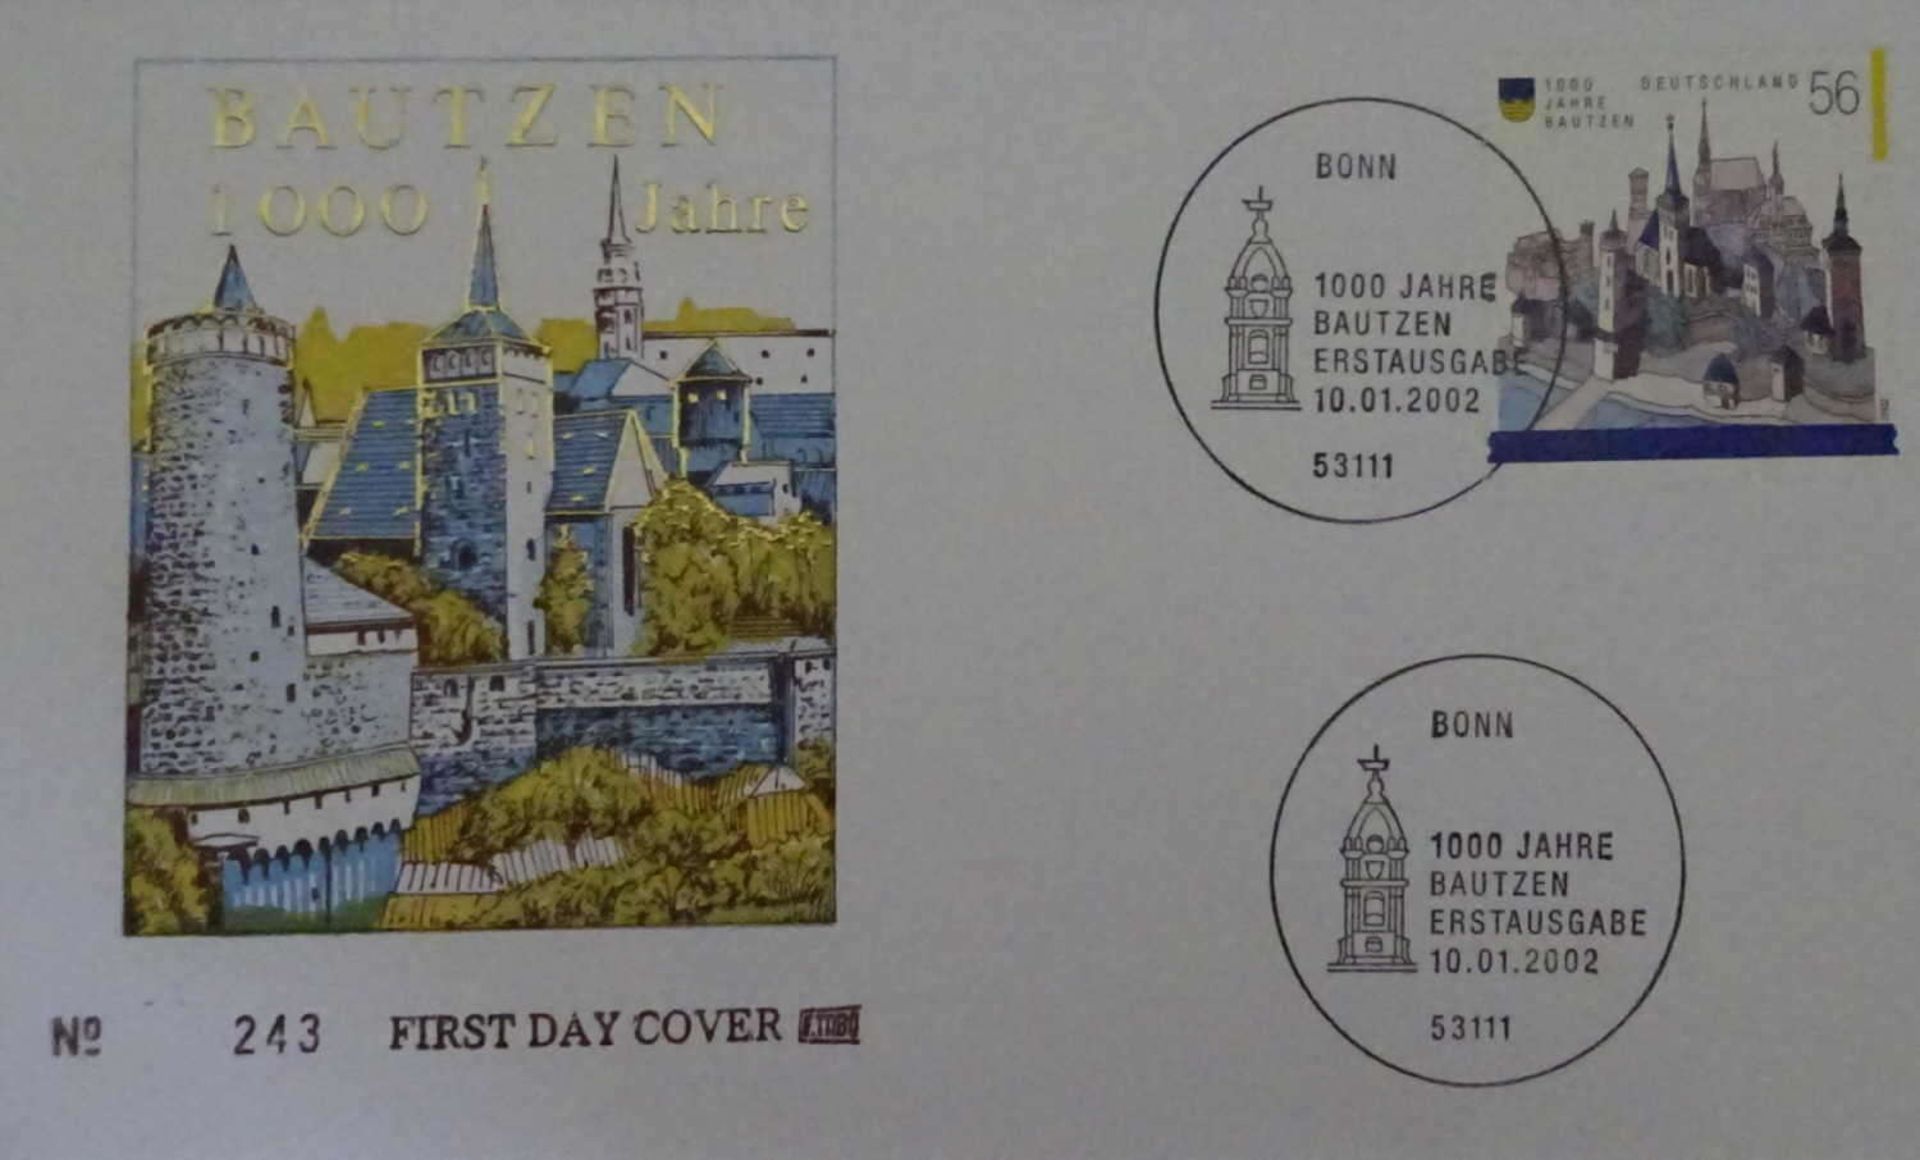 75 FDC BRD ab 2002 75 FDC Germany from 2002 - Image 3 of 3